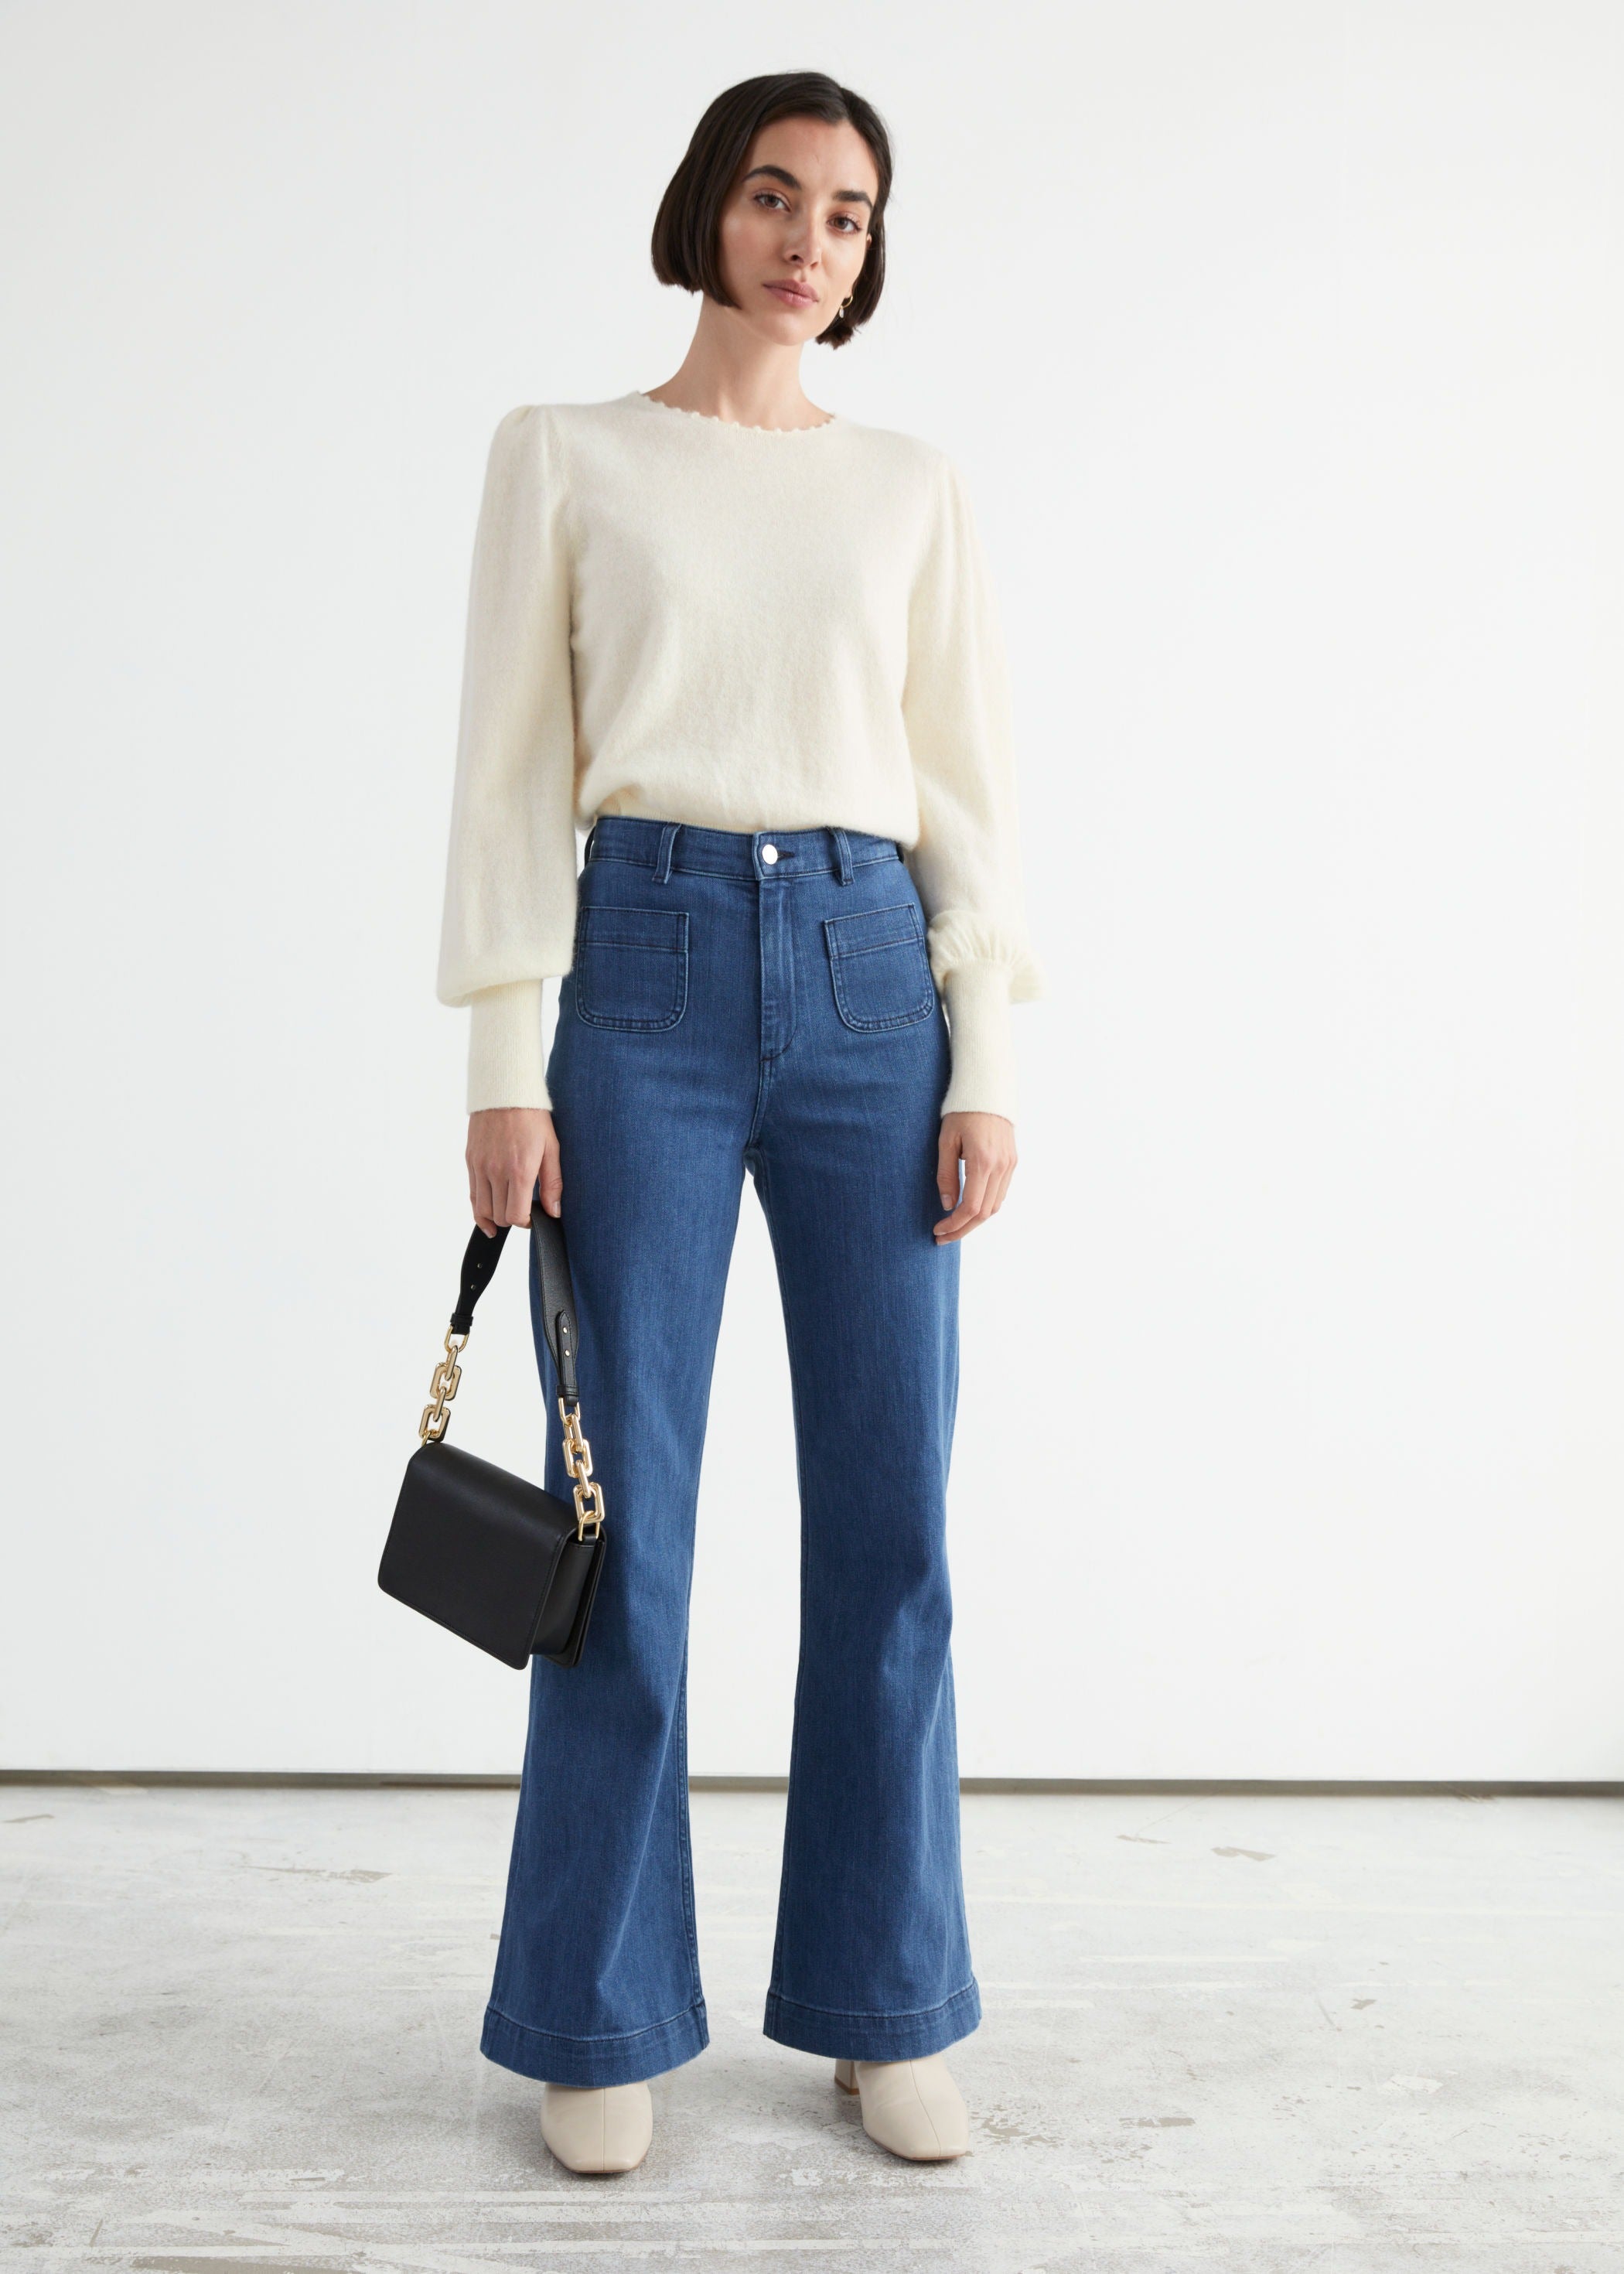 & Other Stories + High Waisted Flare Jeans